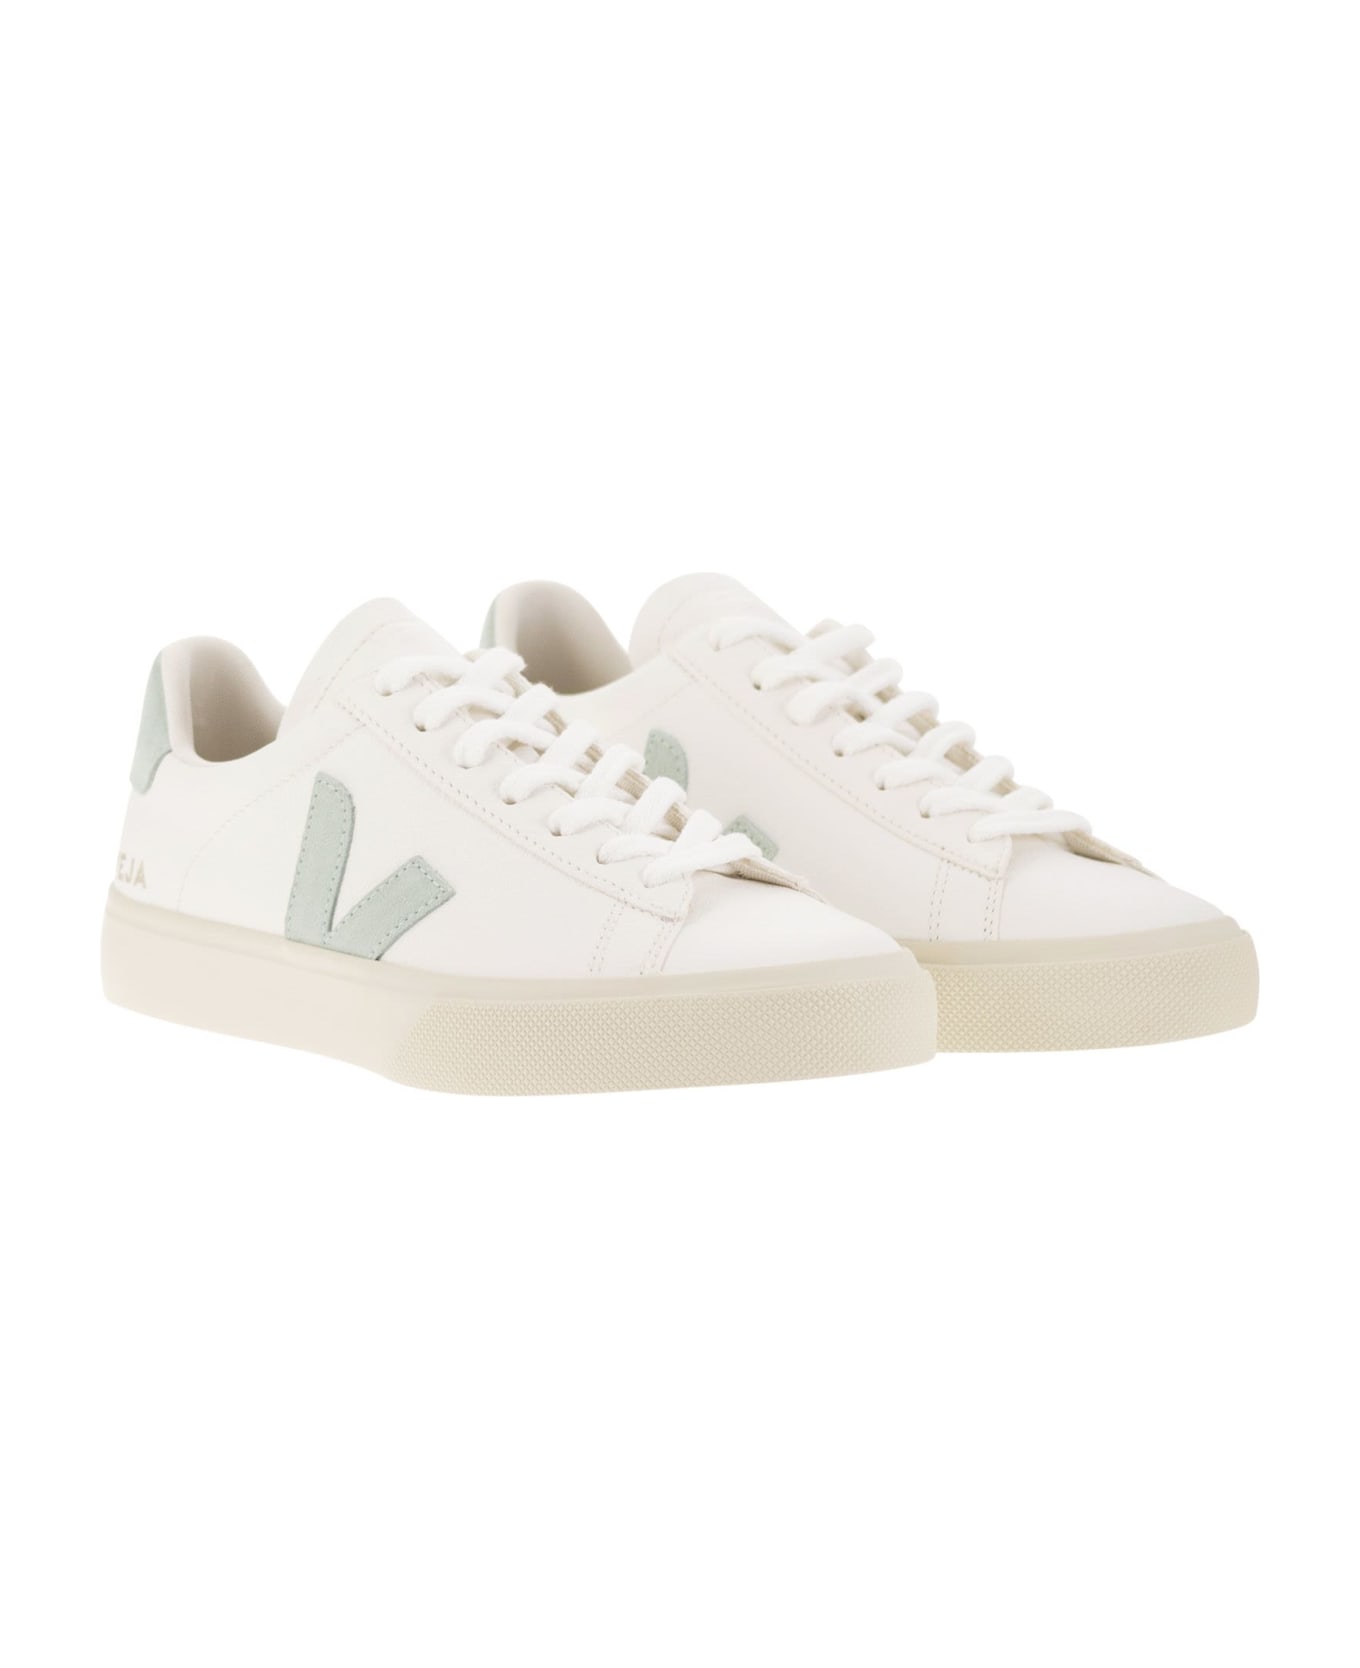 Veja Chromefree Leather Trainers - White/water Green スニーカー